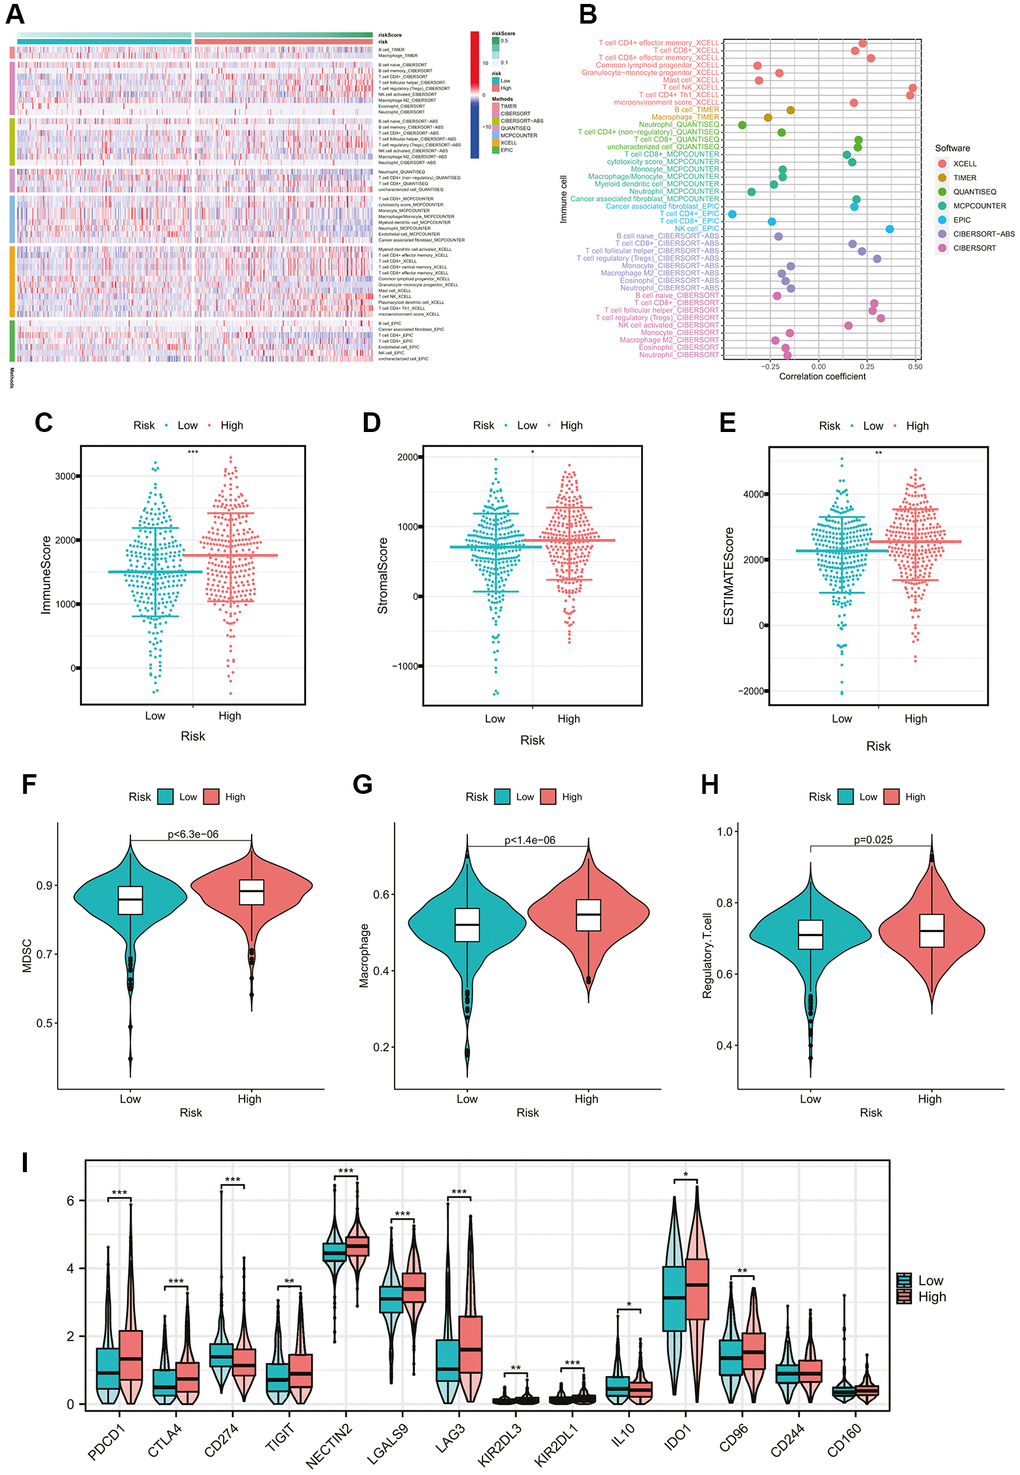 Comparison of immune cells and immune functions of ccRCC patients between risk groups. (A) The heatmap showing the tumor-infiltrating immune cells and risk scores by 7 mainstream algorithms. (B) The lollipop plot showing the correlation coefficients of tumor-infiltrating immune cells with CMGs-based risk scores. (C–E) Differential analysis of immune-related scores between risk groups based on the ESTIMATE algorithm. (F–H) Differential abundance analysis of major immunosuppressive infiltrating cells (MDSCs, macrophages, and Tregs) between risk groups based on the ssGSEA algorithm. (I) Differential expression analysis of the common immune checkpoint molecules between risk groups (PDCD1, p p p *p-value **p-value ***p-value 